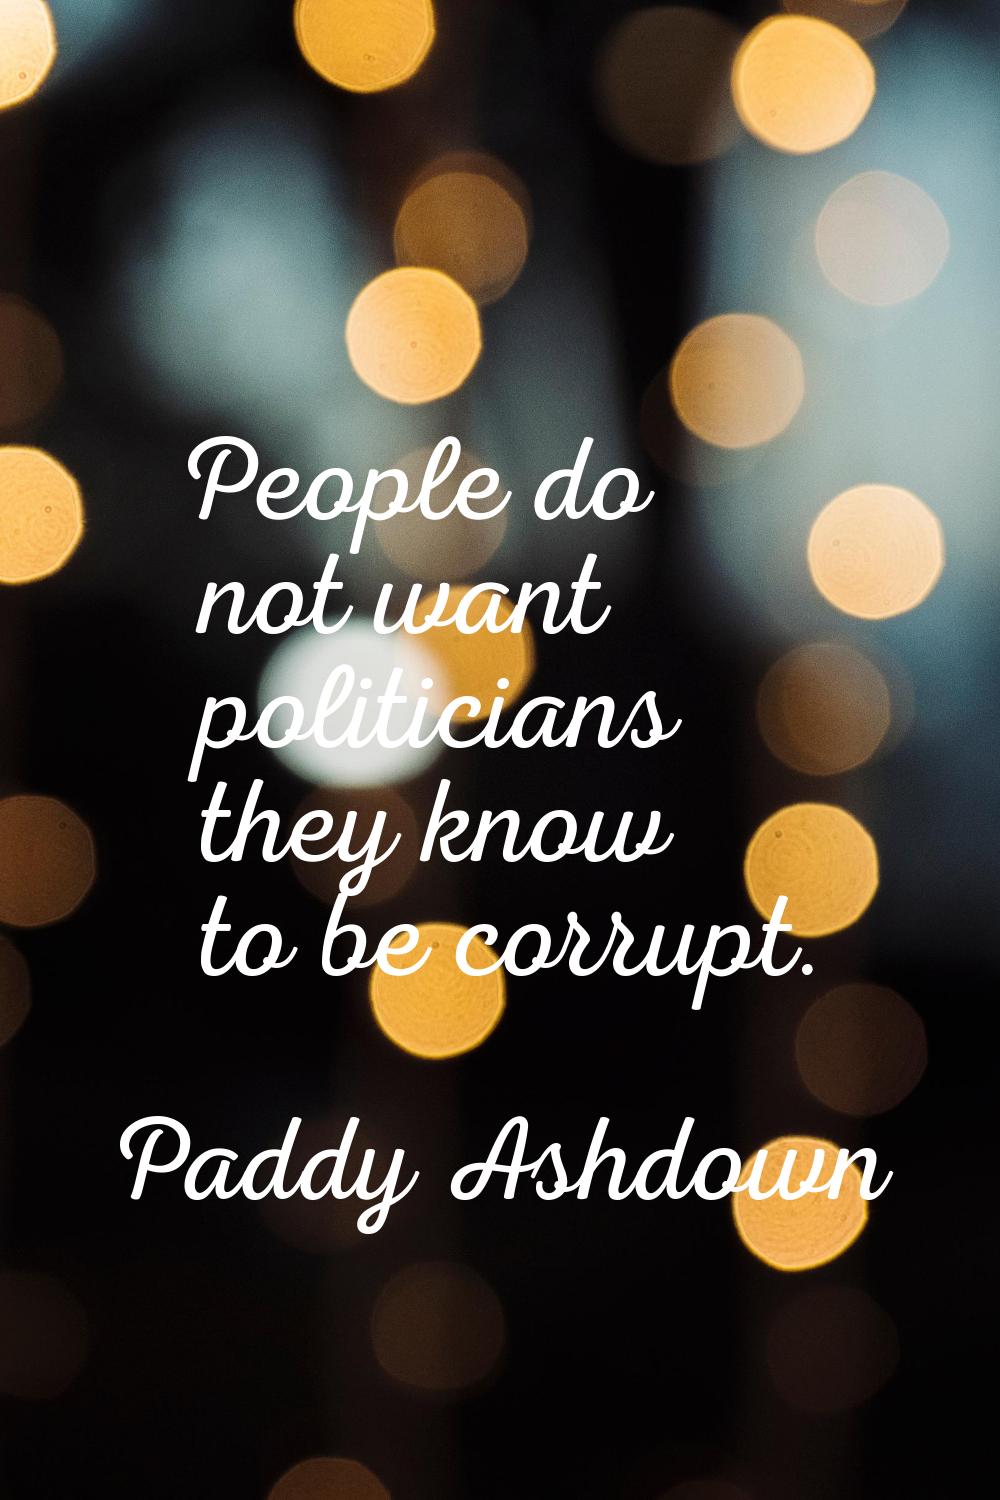 People do not want politicians they know to be corrupt.